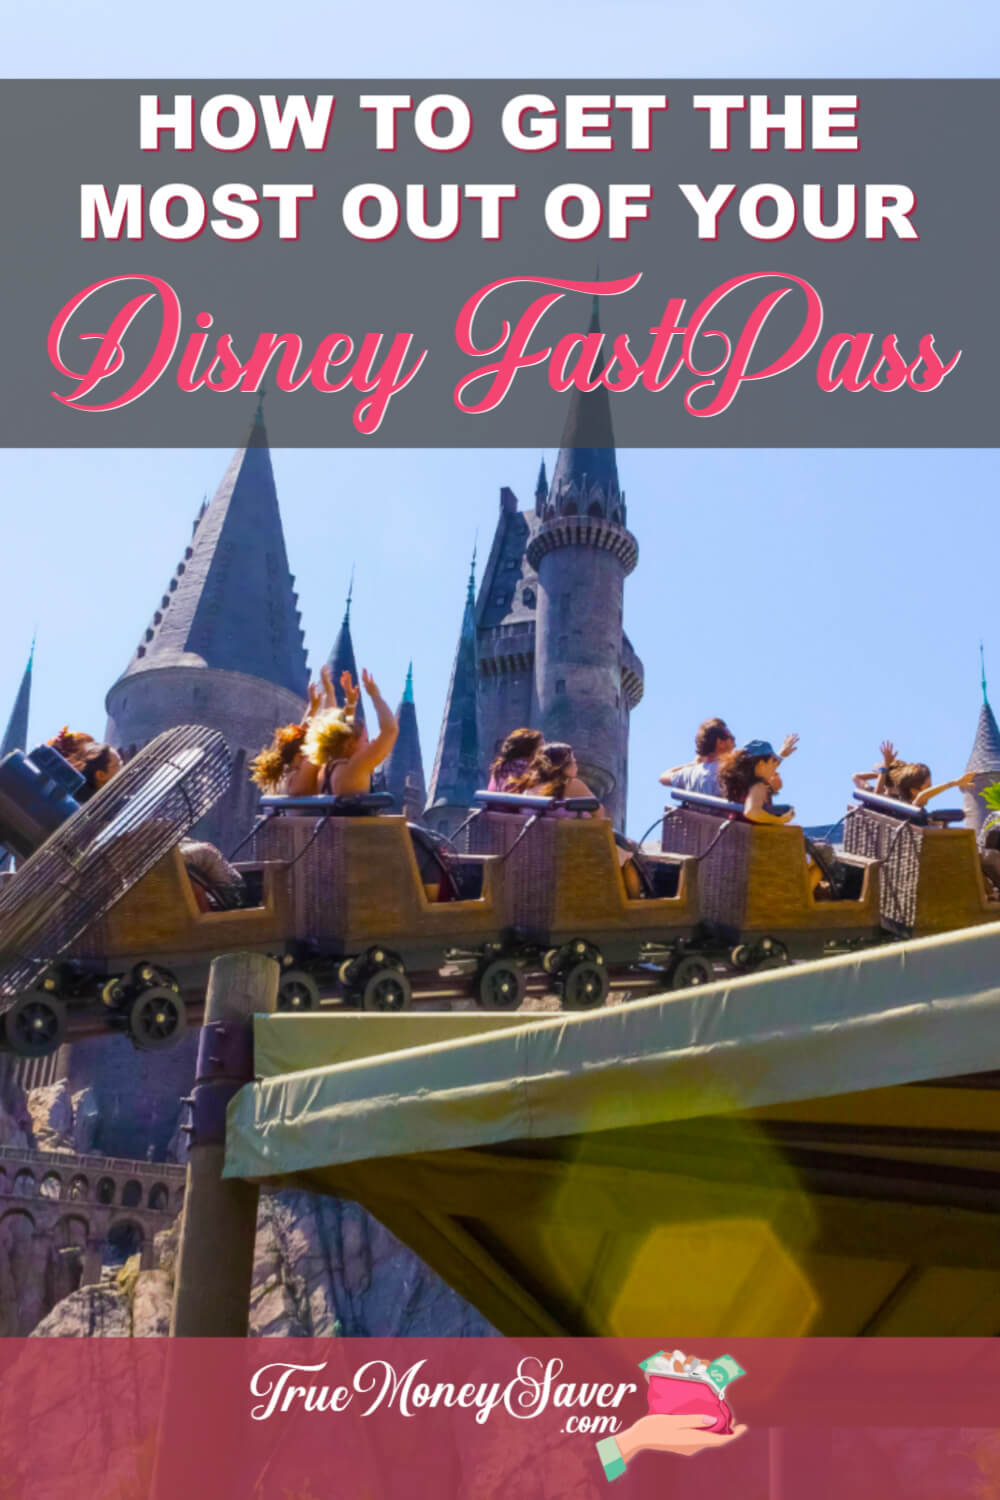 How To Get The Most Out Of Your Disney FastPass